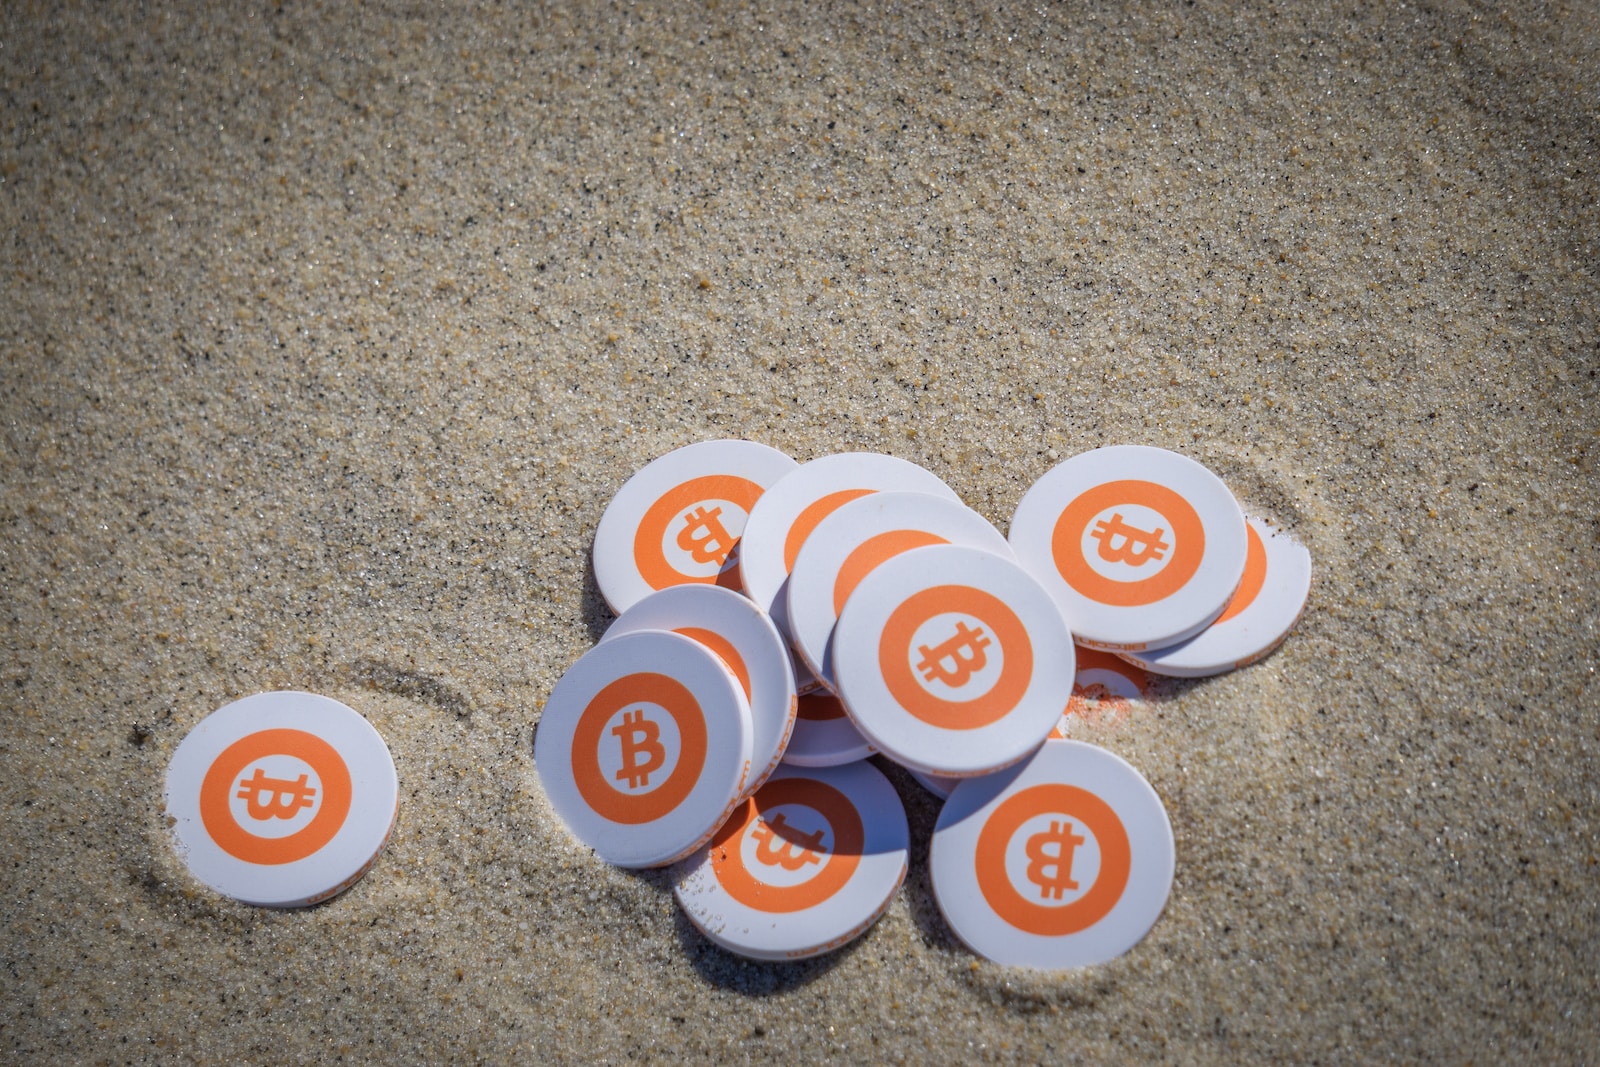 white orange and blue round buttons on brown sand